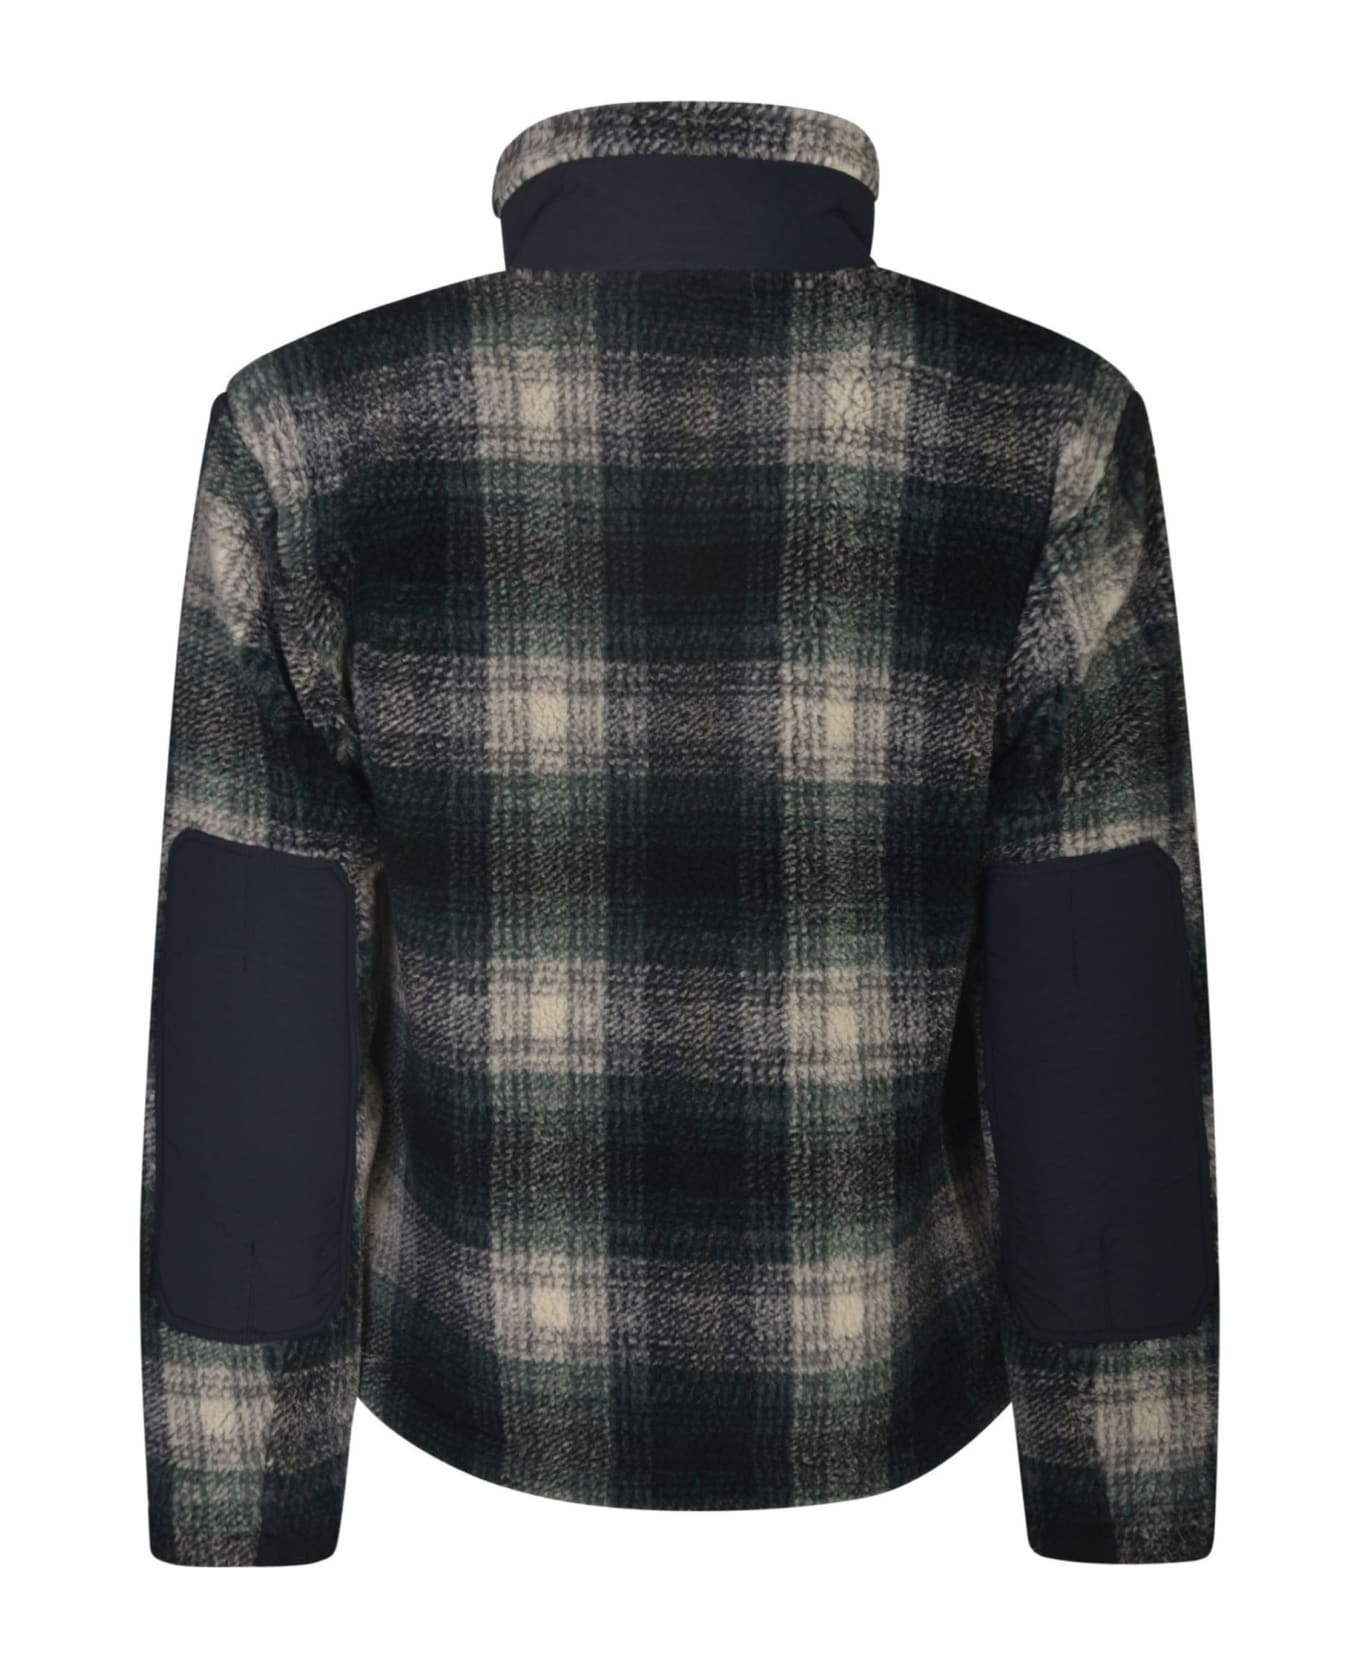 Woolrich Check Jacket - Grey